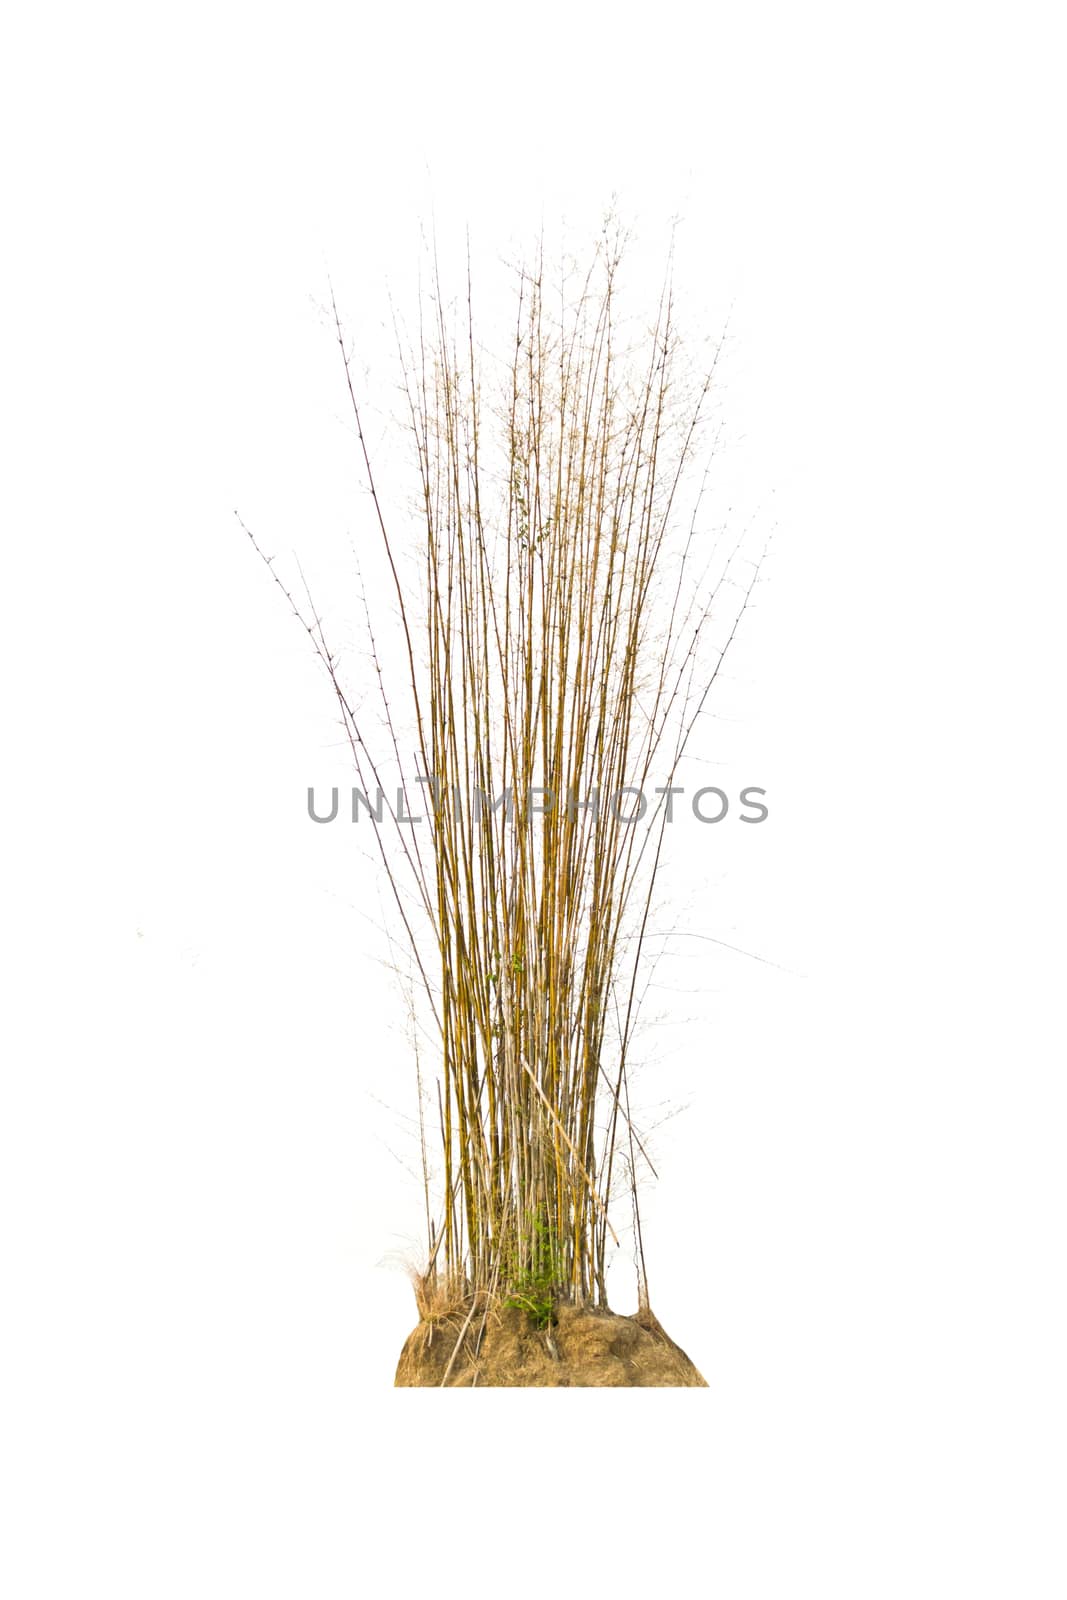 Bamboo tree isolate on a white background